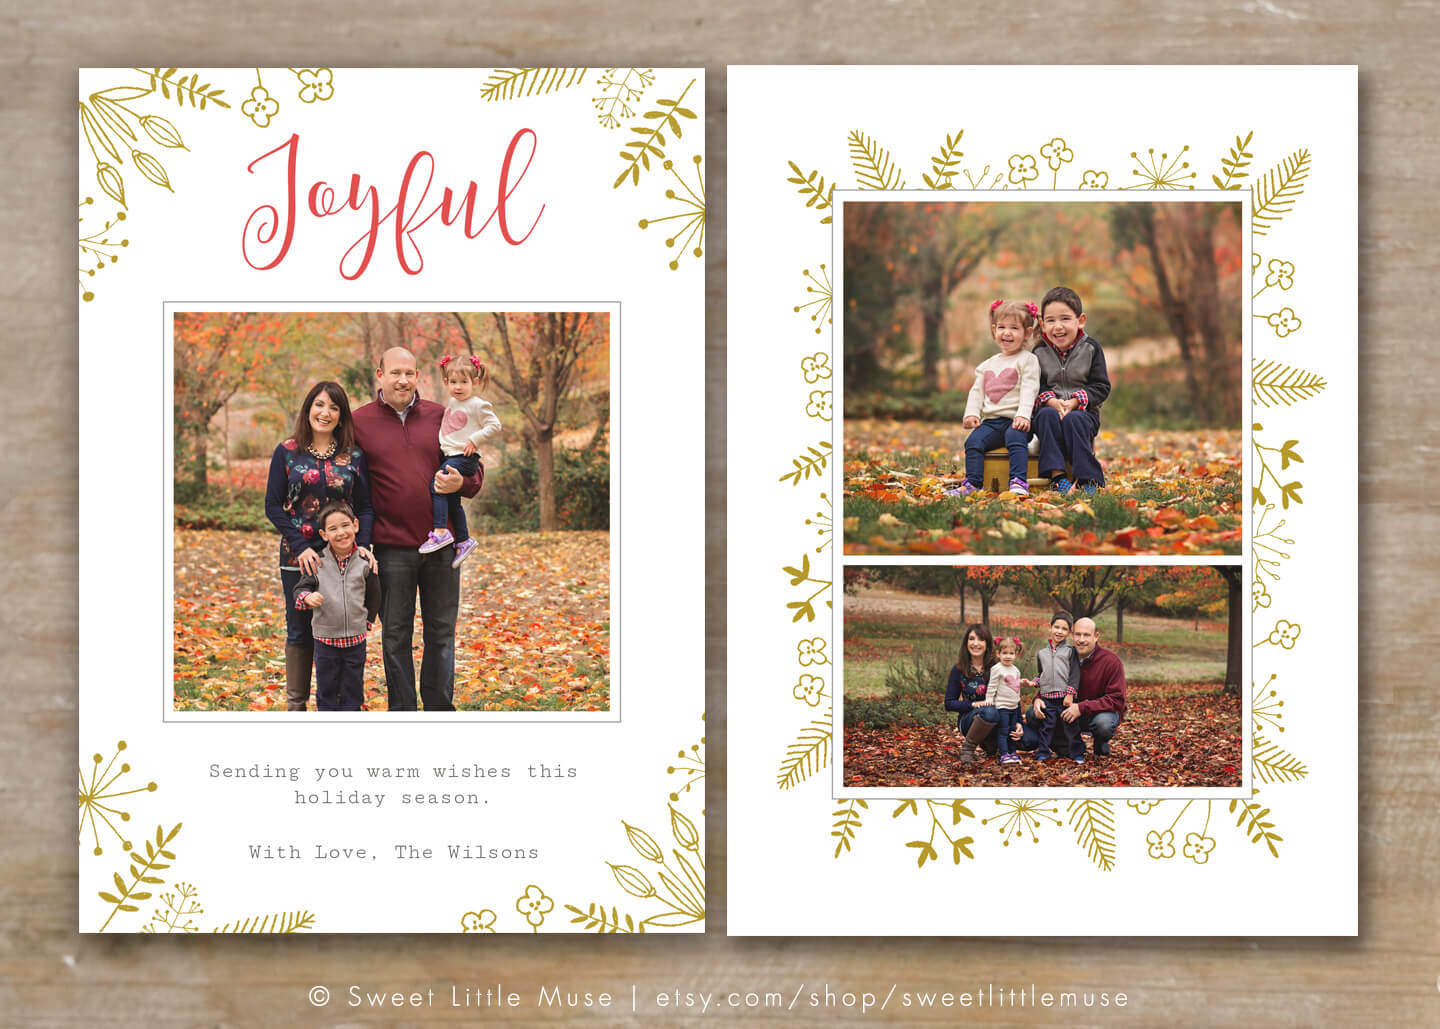 30 Holiday Card Templates For Photographers To Use This Year In Free Photoshop Christmas Card Templates For Photographers